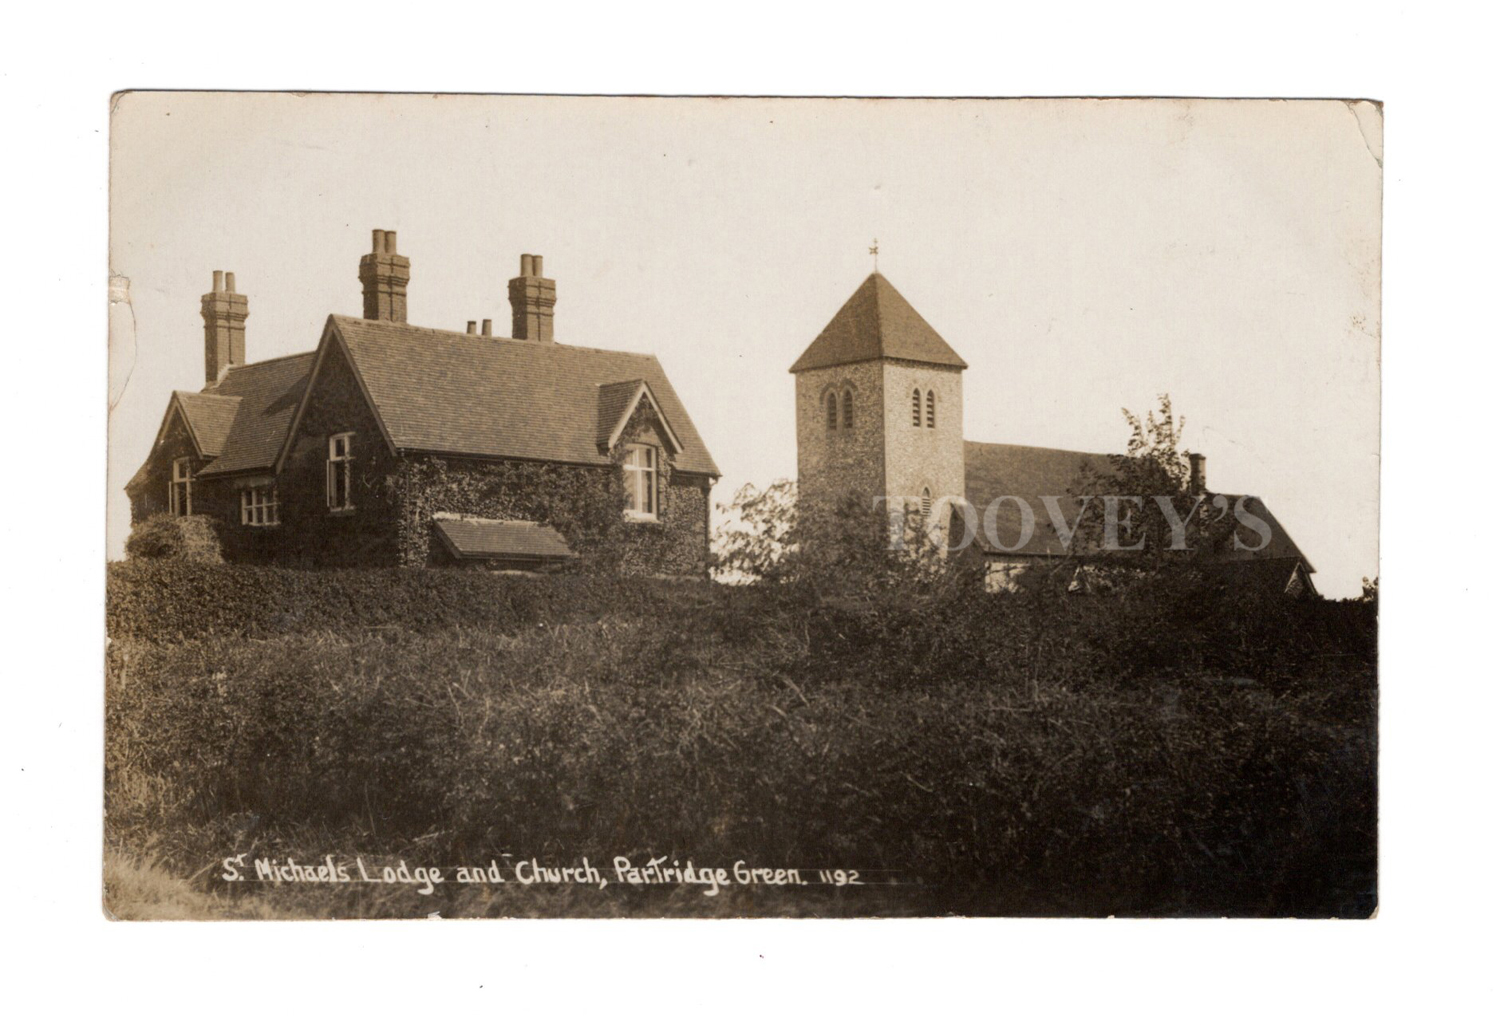 A collection of 19 photographic postcards of West Sussex, including postcards titled 'Shipley Post - Image 4 of 19